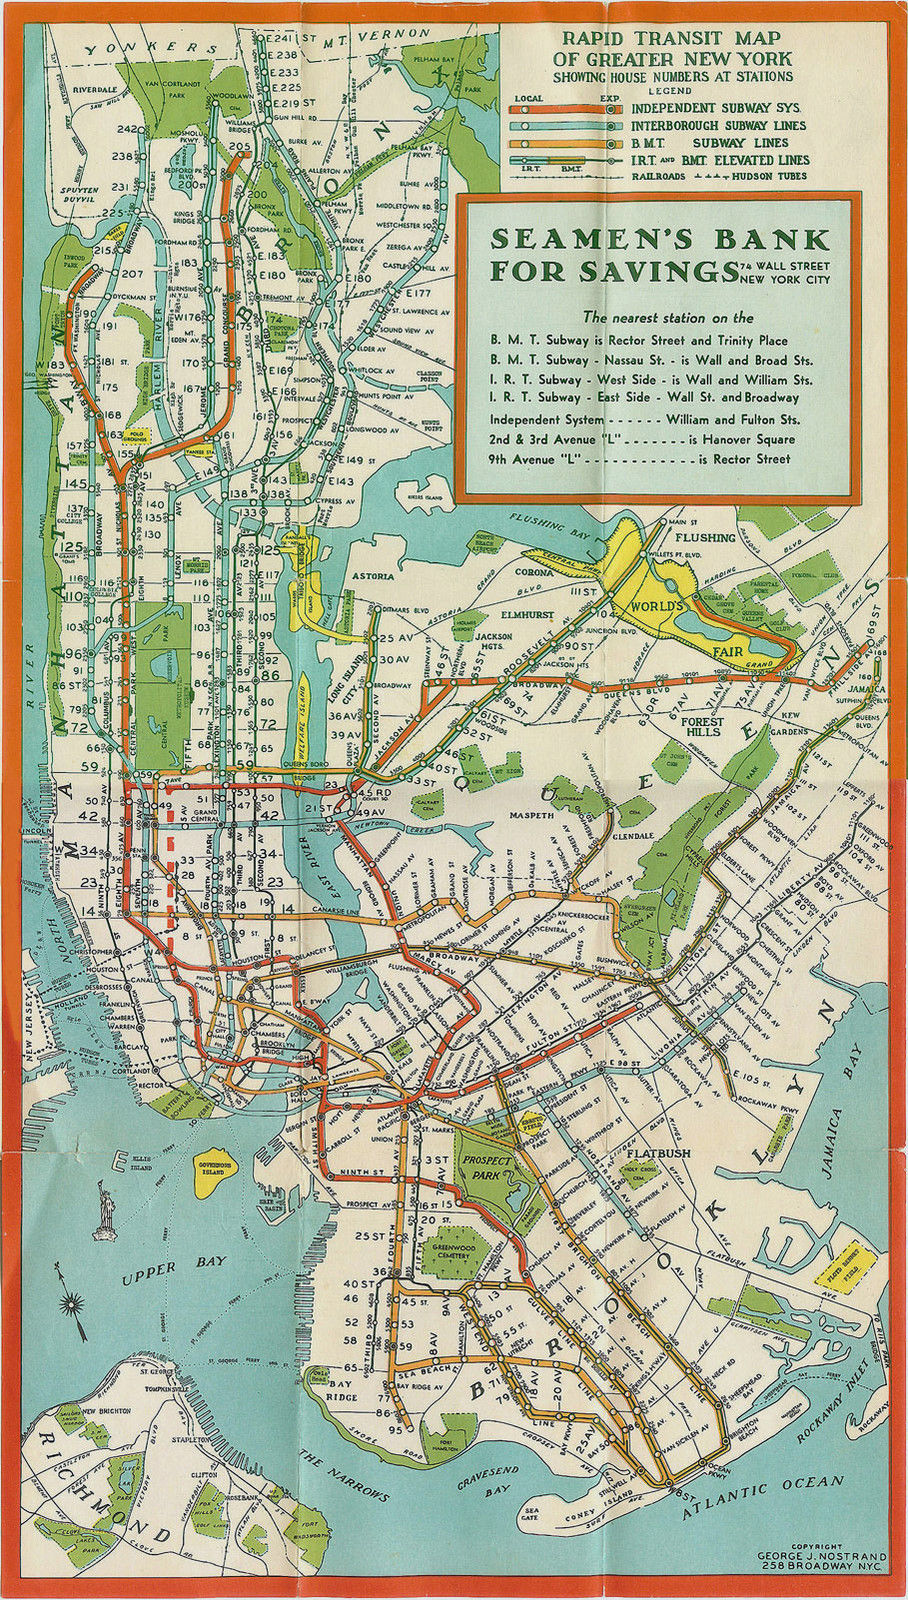 1948 New York City NYC Subway System Map Train Transit IRT BMT IND